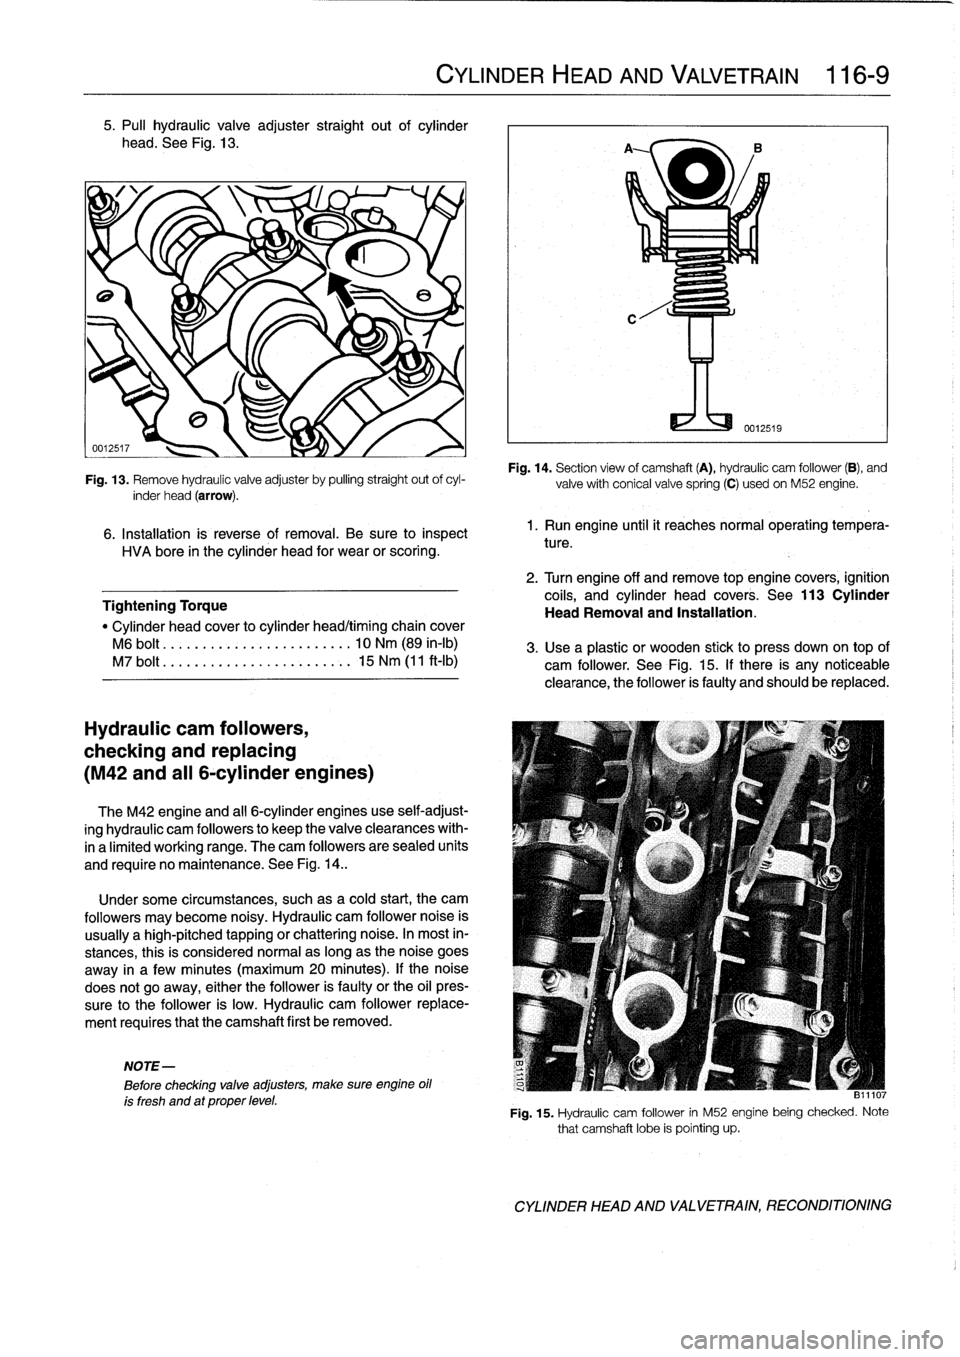 BMW M3 1996 E36 Service Manual 5
.
Pull
hydraulic
valve
adjuster
straight
out
of
cylinder

head
.
See
Fig
.
13
.

Fig
.
13
.
Remove
hydraulic
valve
adjuster
by
pulling
straight
out
ofcyl-
inder
head
(arrow)
.

6
.
Installation
is
r